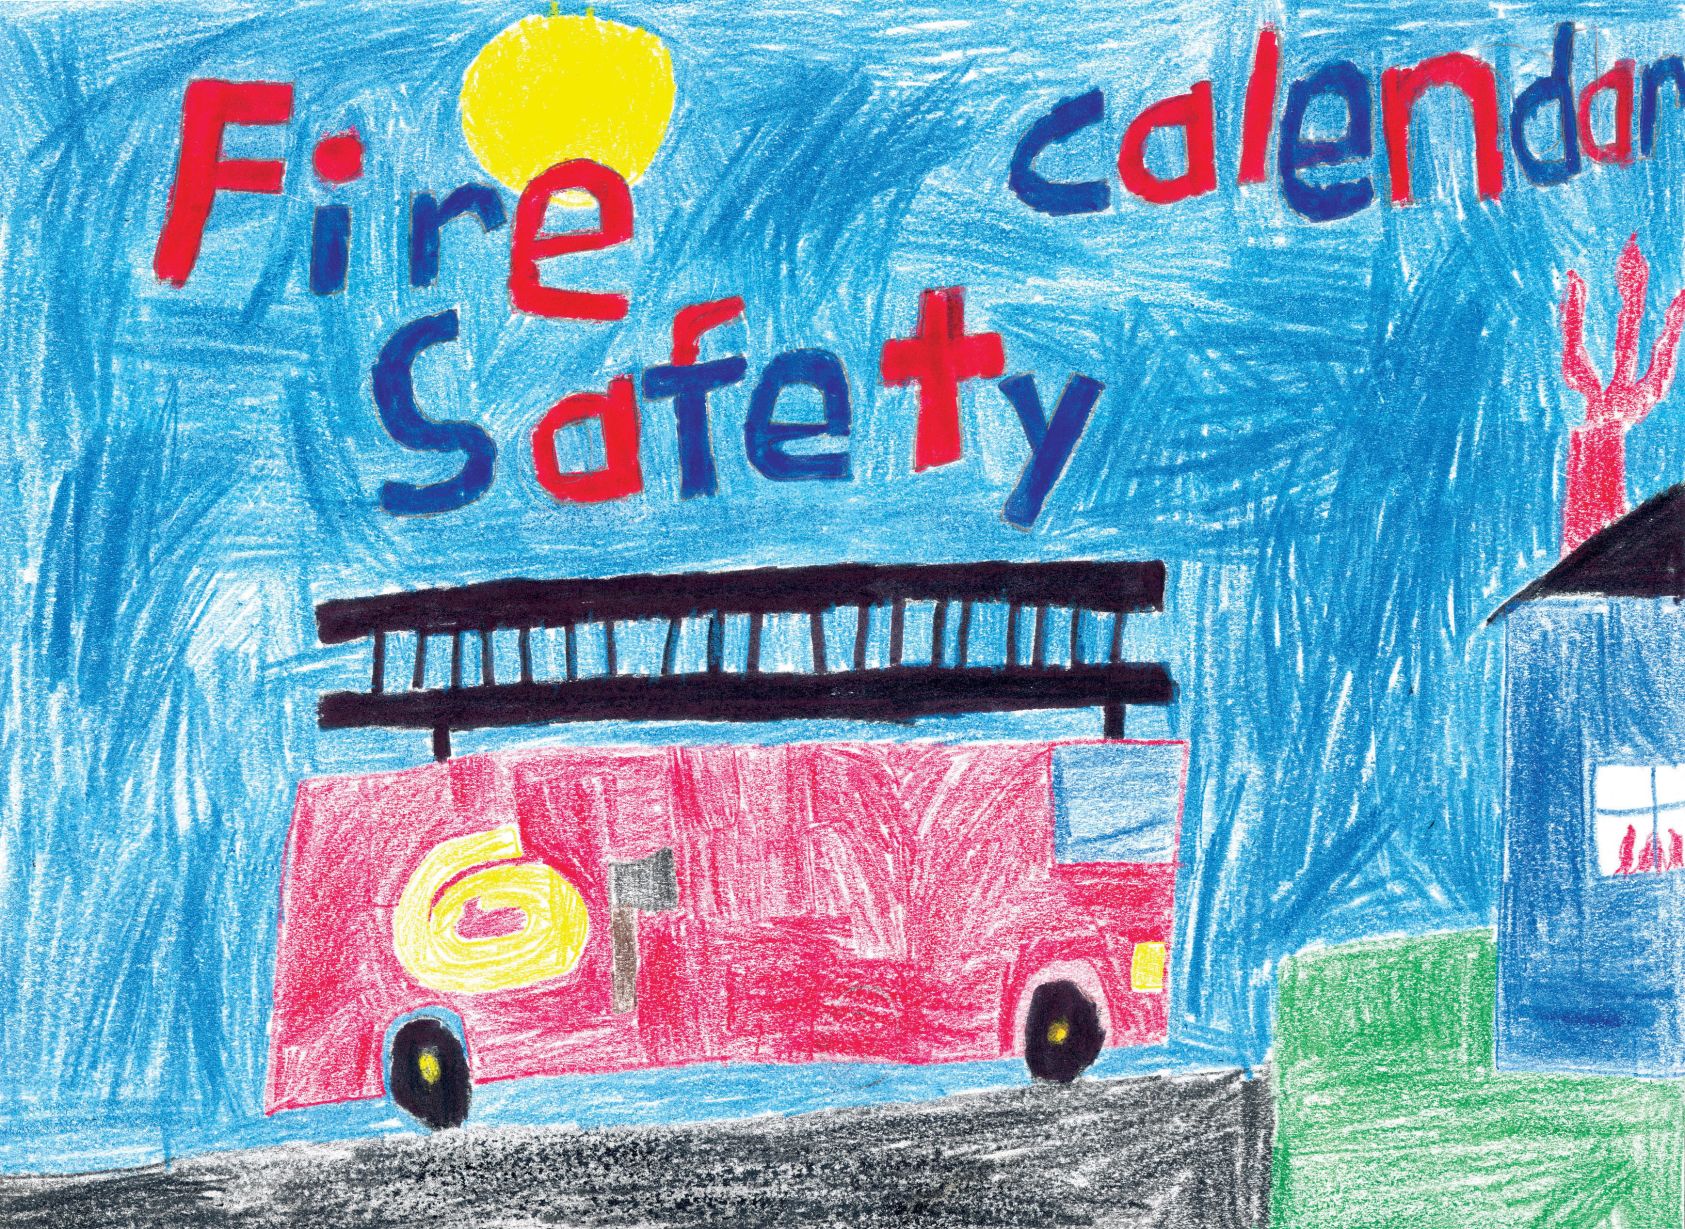 Winners of Fire Safety Poster Contest